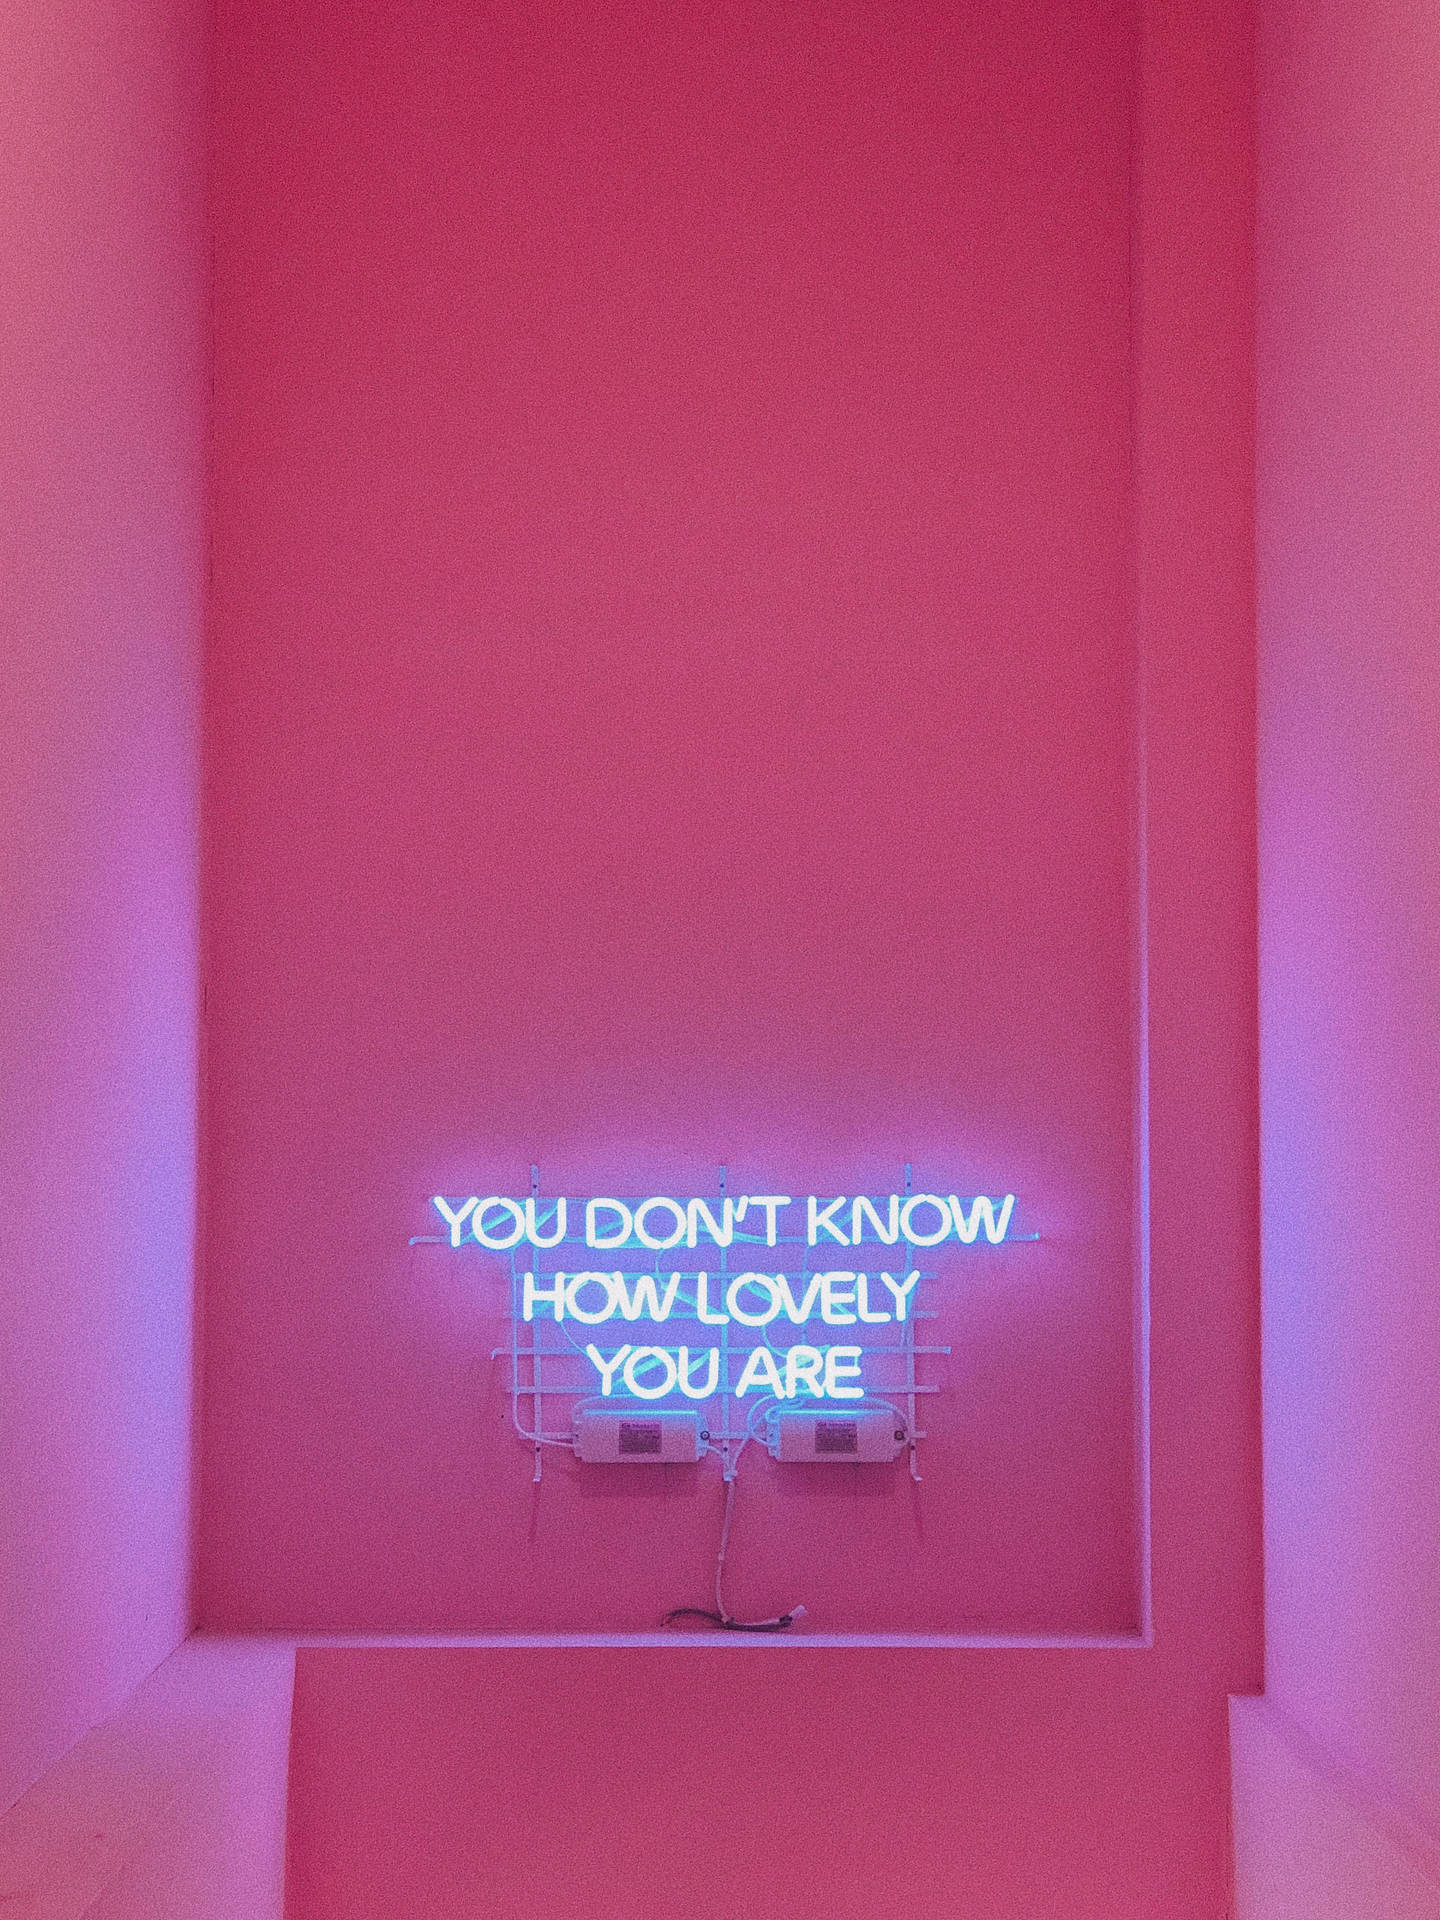 Aesthetic Quotes In Pink Room Background